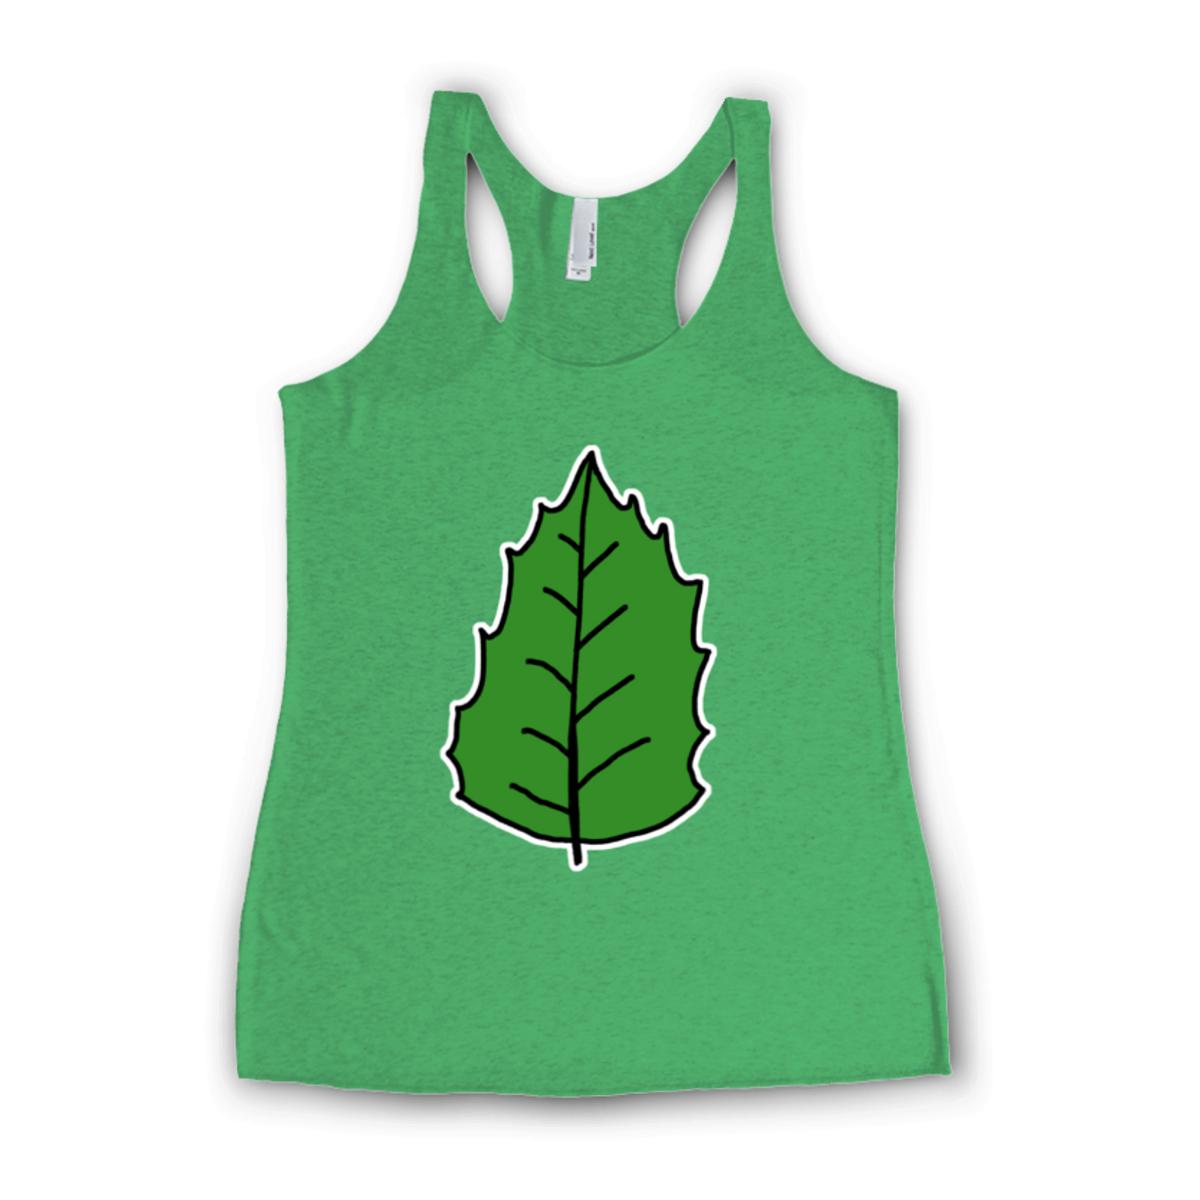 Holly Leaf Ladies' Racerback Tank Extra Small envy-green